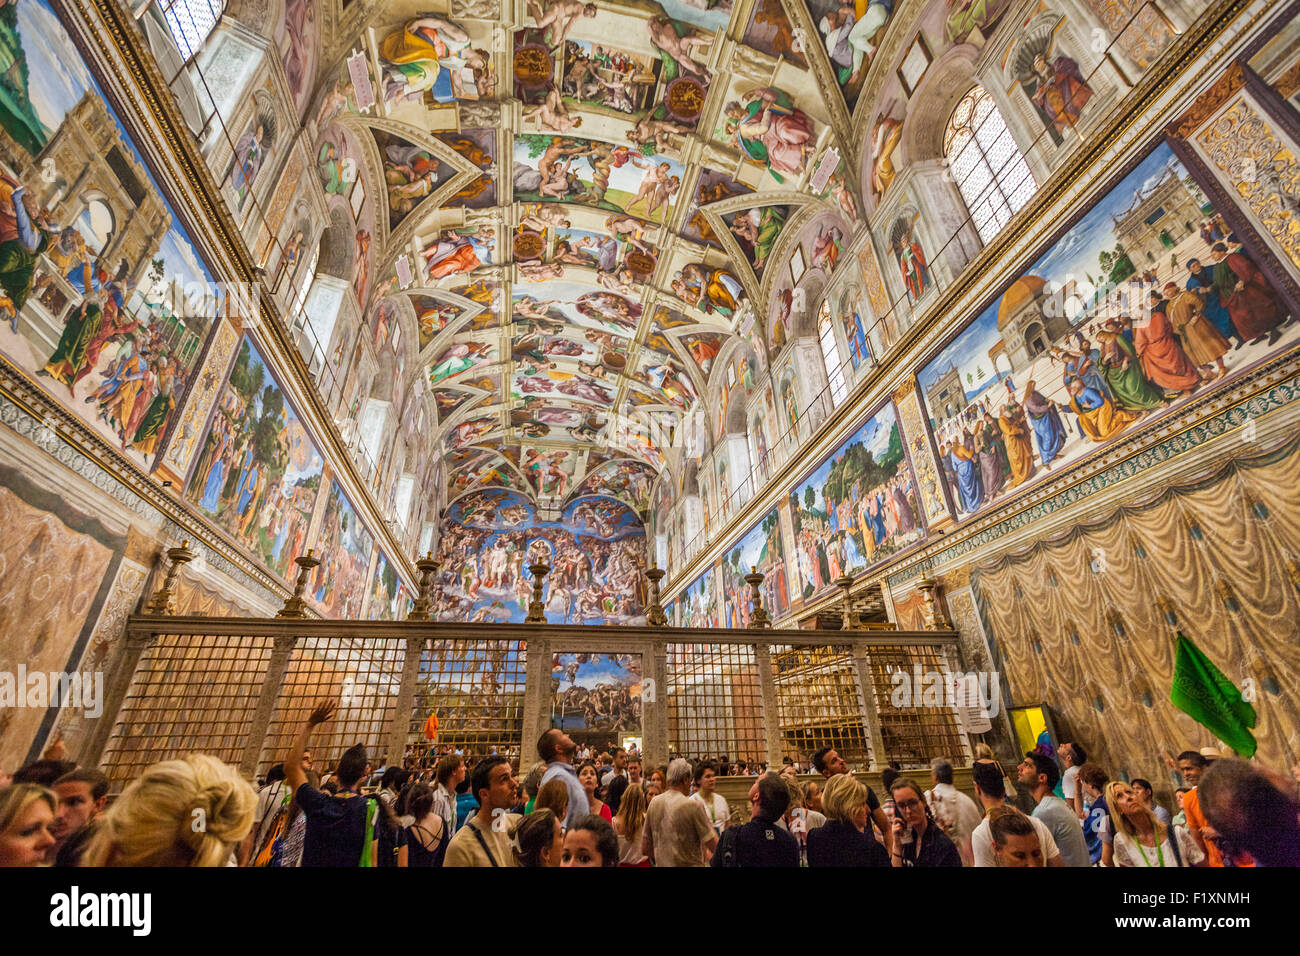 Visitors and tourists in the Sistine Chapel Apostolic Palace Vatican Museum Vatican City Rome Italy EU Europe Stock Photo